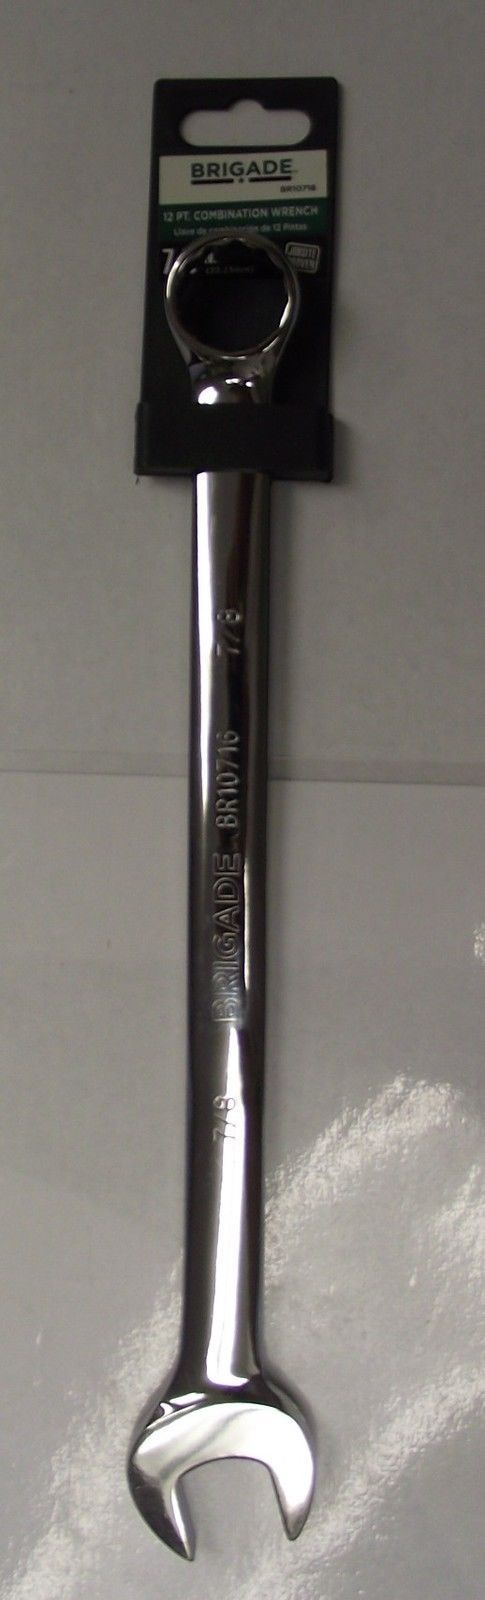 Brigade BR10716 7/8" Full Polish Combination Wrench 12 Point